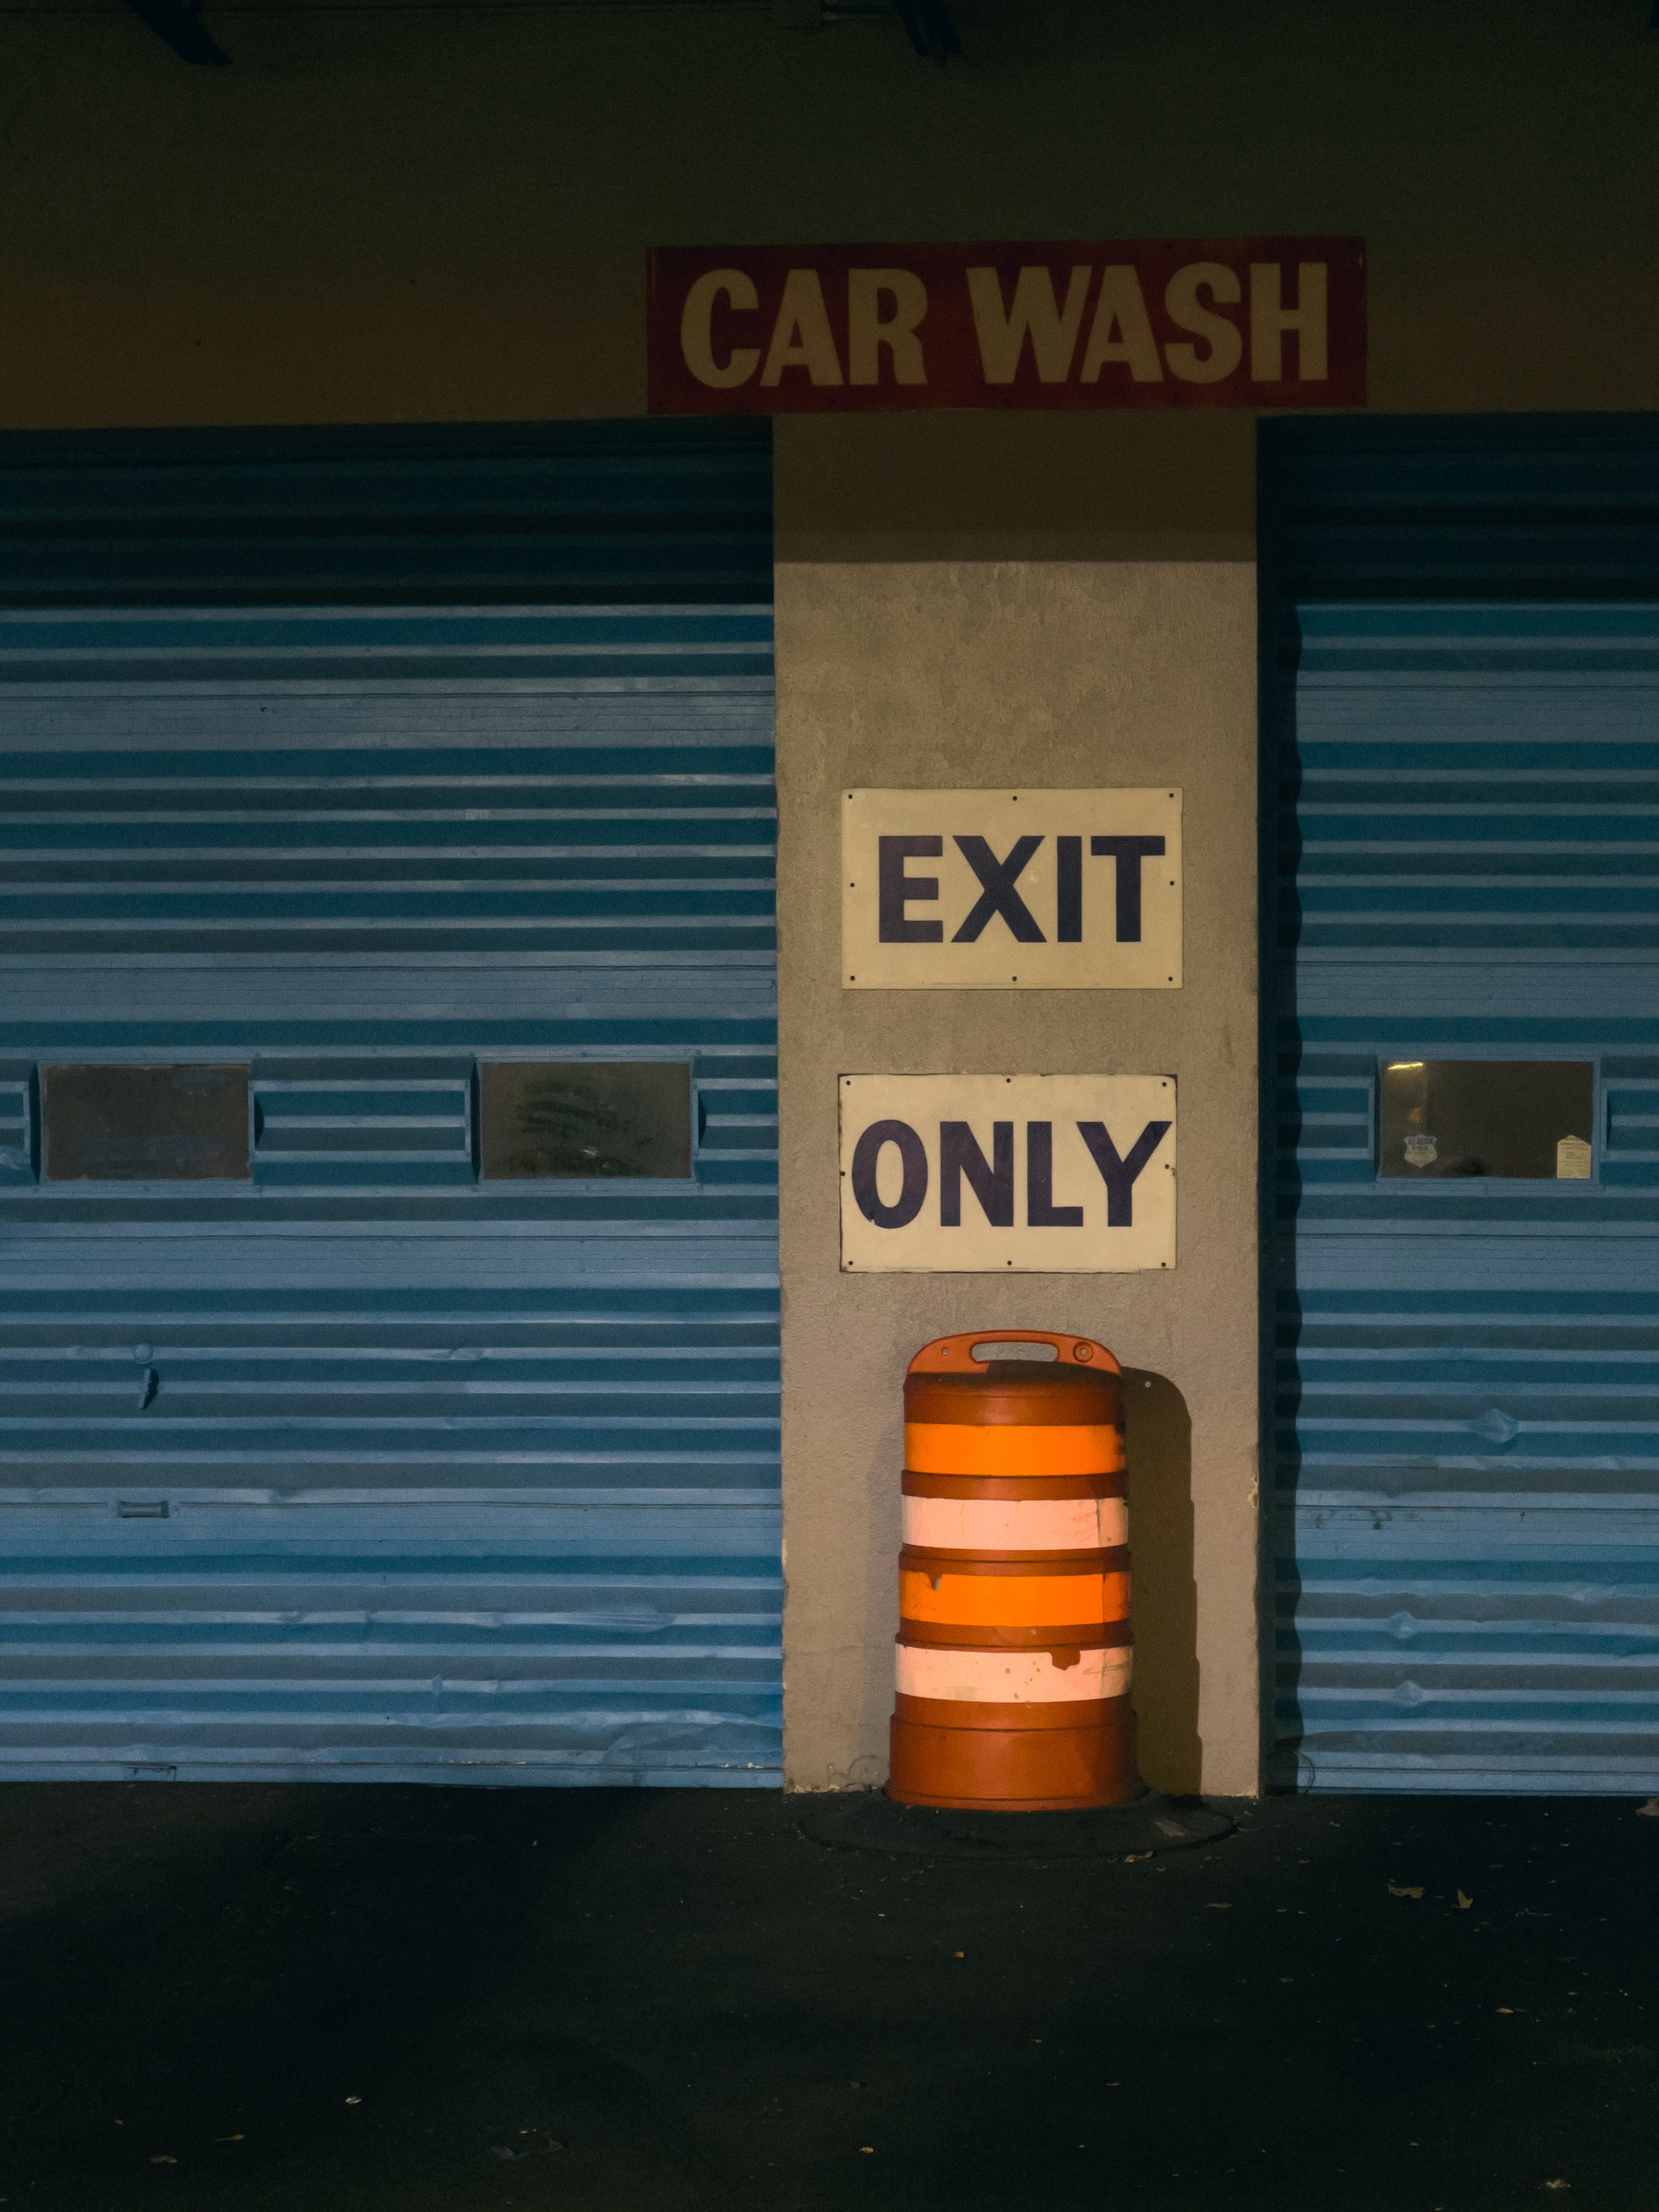 Exit only sign and orange traffic barrel in front of blue garage doors at a car wash.